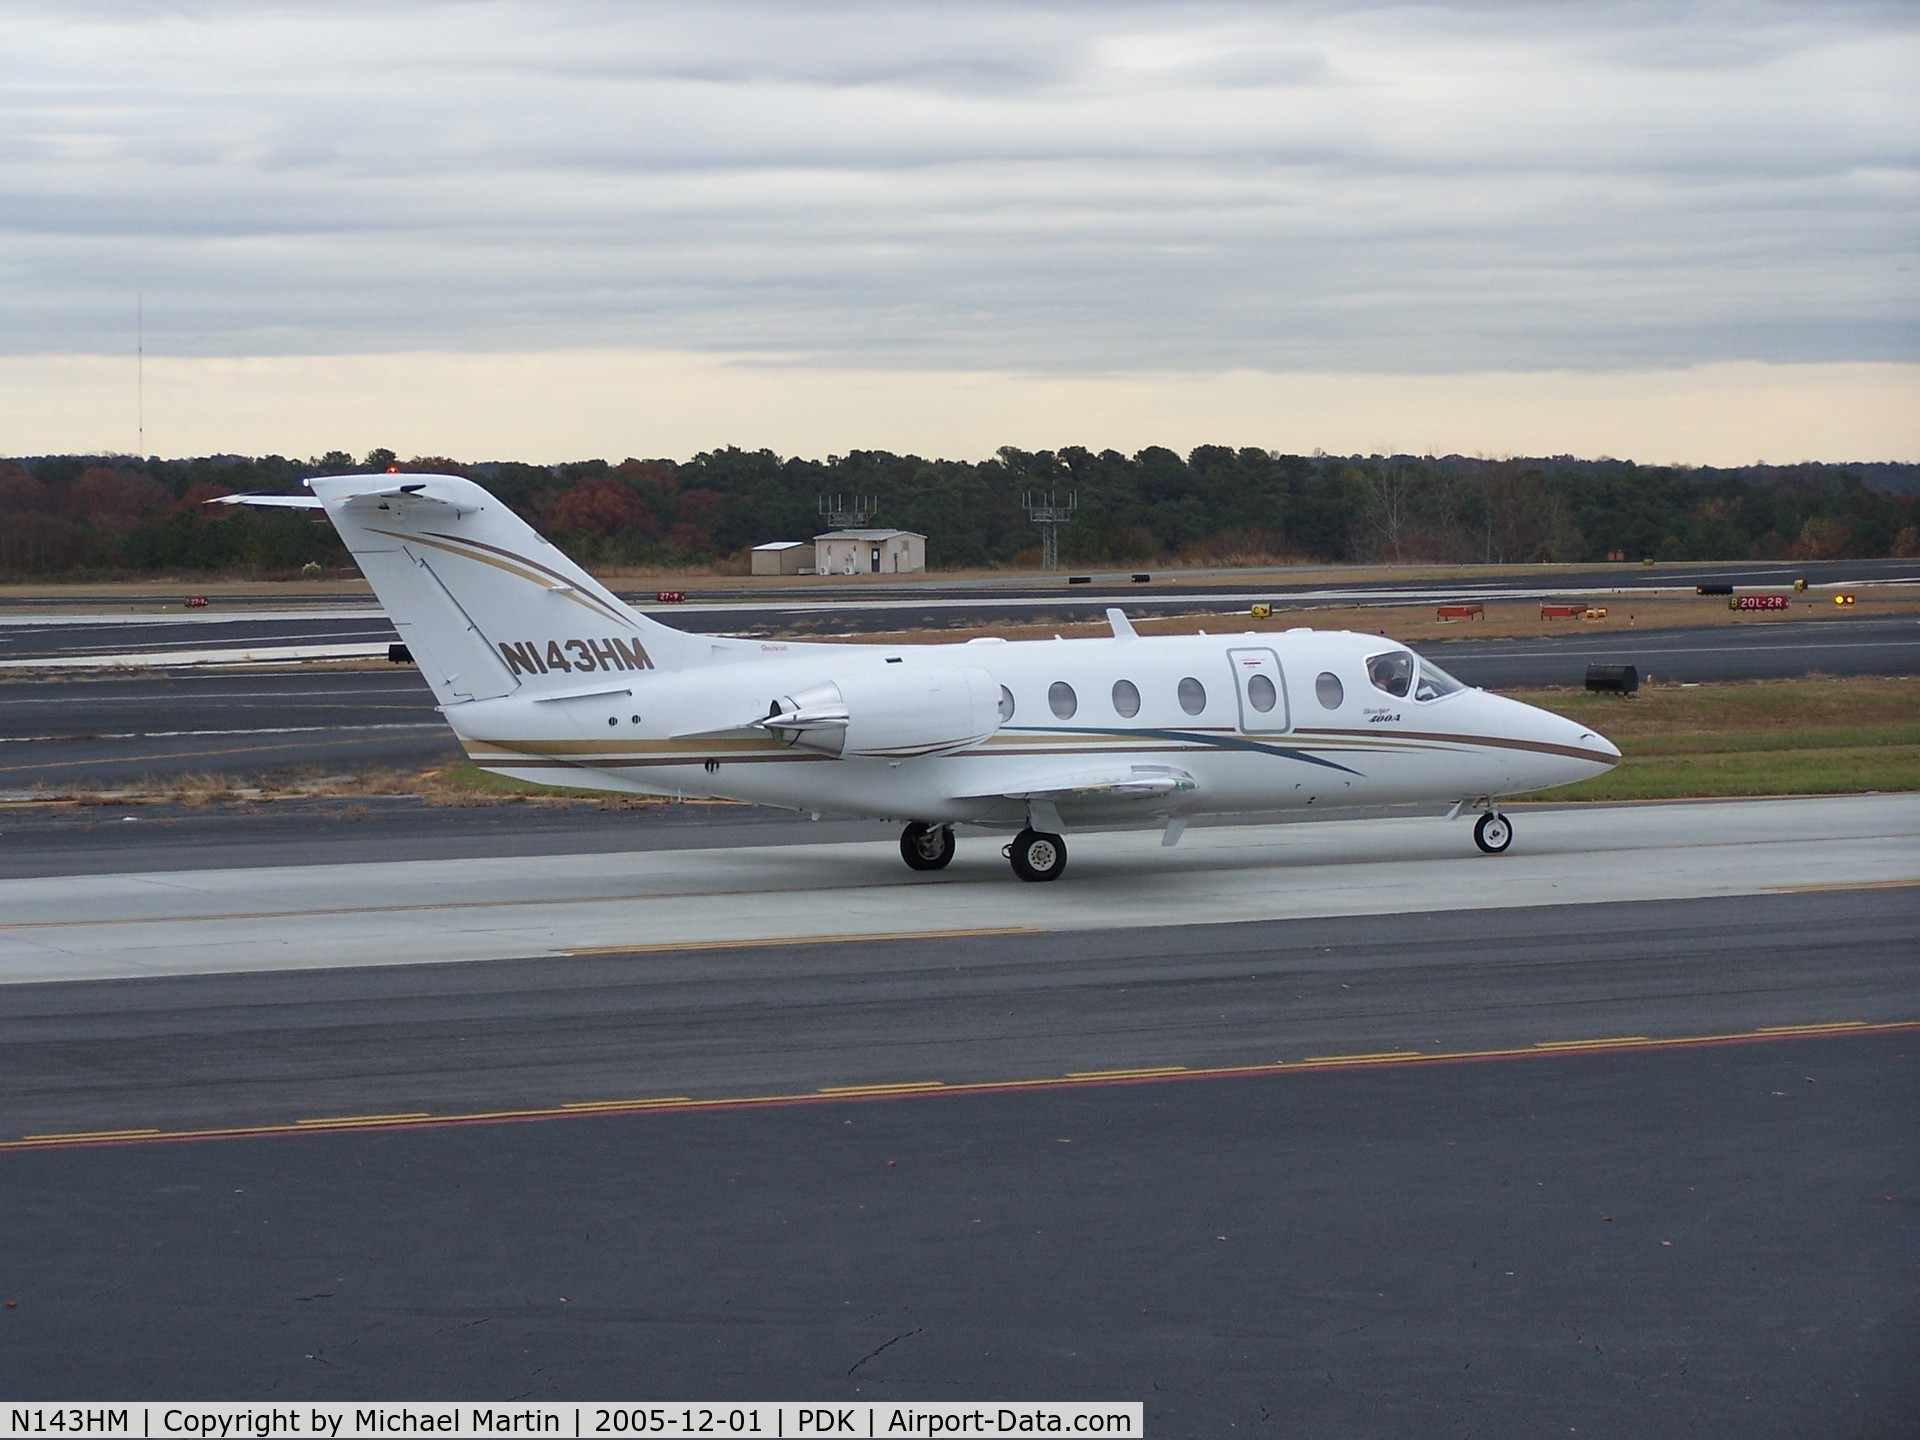 N143HM, 1998 Raytheon Aircraft Company 400A C/N RK-205, Taxing to Runway 2L